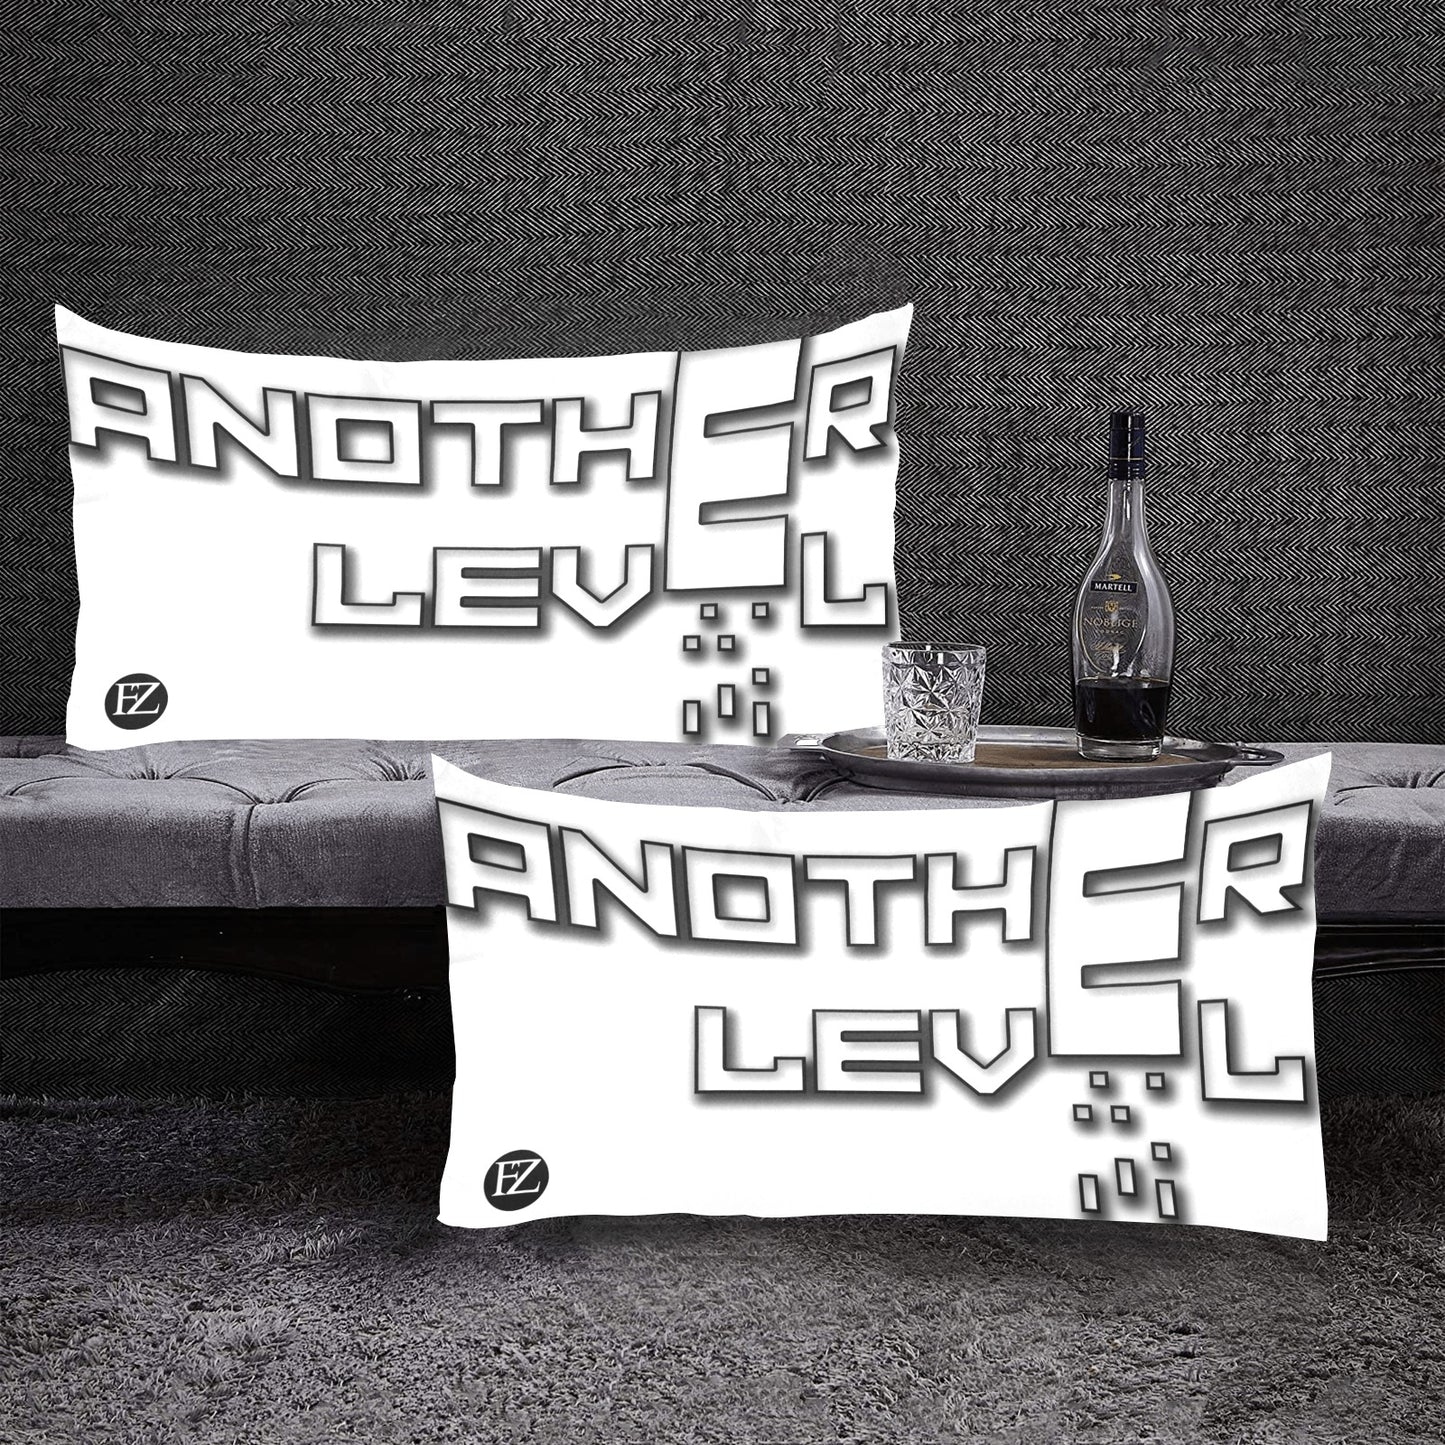 fz levels pillow case one size / fz levels pillow case - white rectangle pillow cases 20"x36"(one side)(pack of 2)